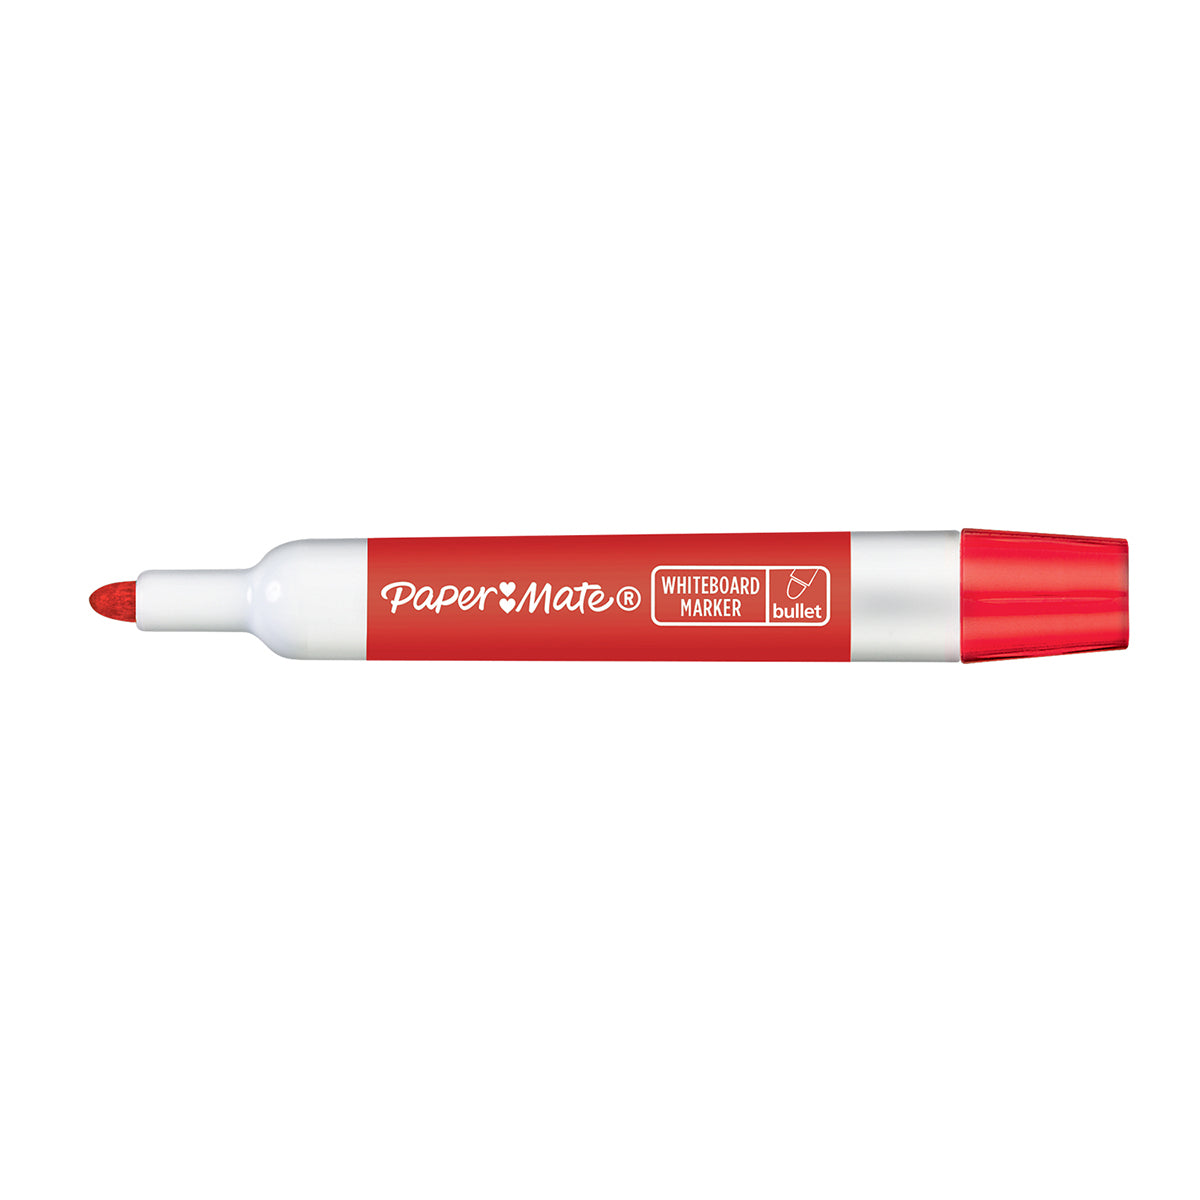 Paper Mate Whiteboard Marker Bullet Red  Expo Dry Erase Markers